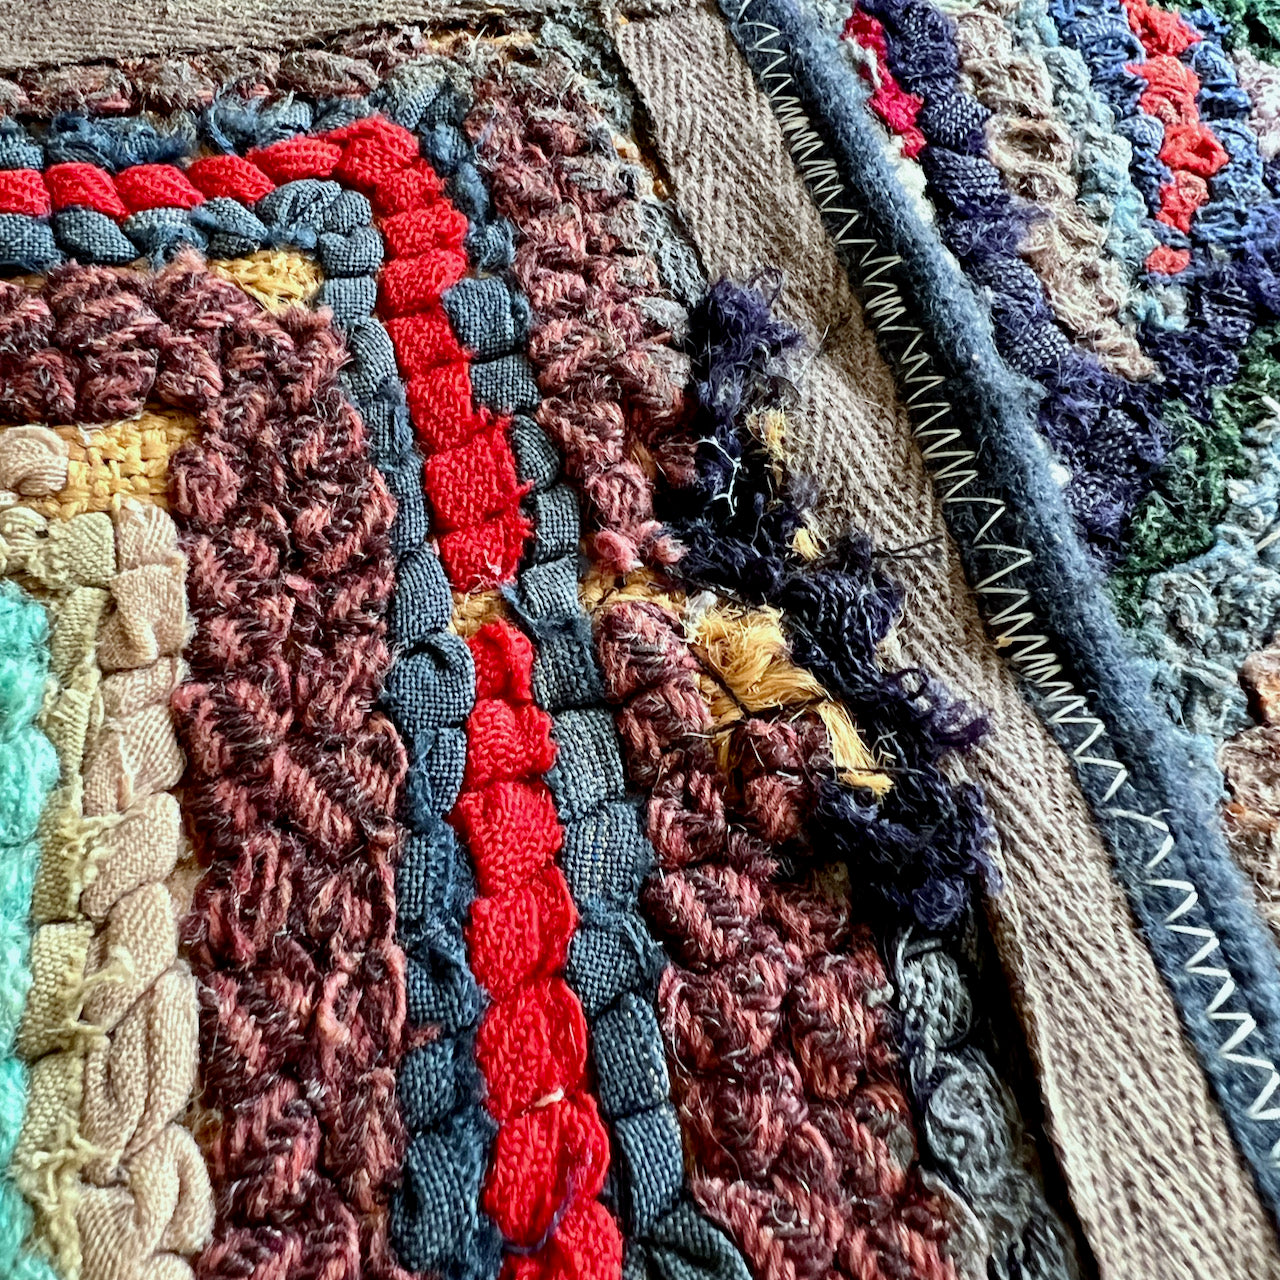 RUG-MAKING HISTORY - THE LATCH-HOOK